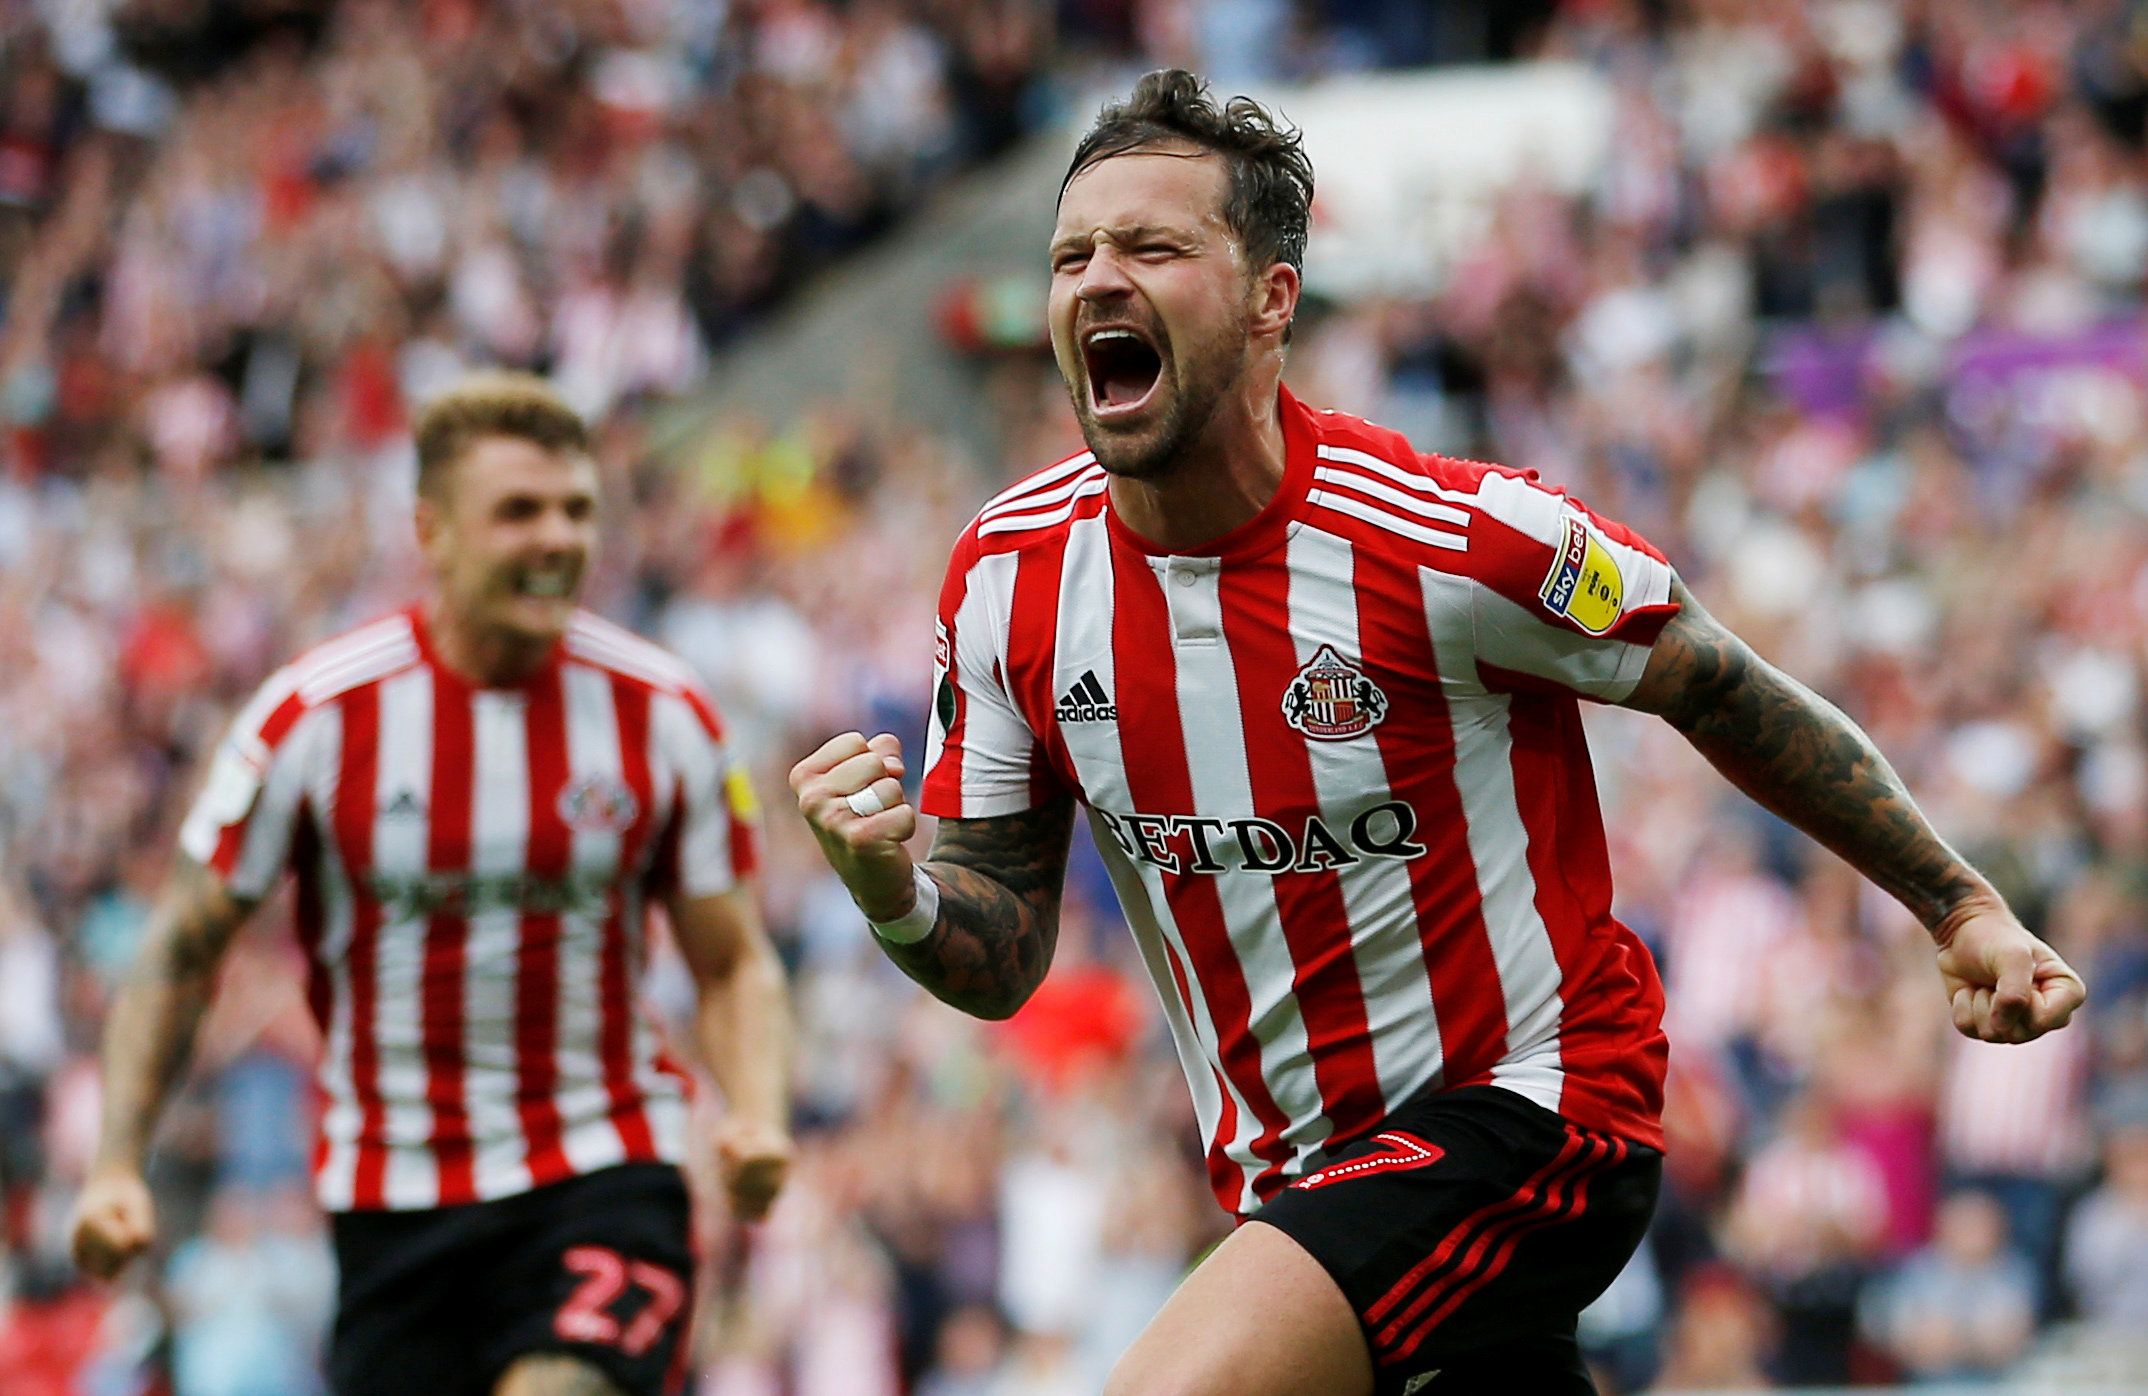 Soccer Football - League One - Sunderland v Scunthorpe United - Stadium of Light, Sunderland, Britain - August 19, 2018   Sunderland's Chris Maguire celebrates after he scores his sides third goal    Action Images/Craig Brough    EDITORIAL USE ONLY. No use with unauthorized audio, video, data, fixture lists, club/league logos or 